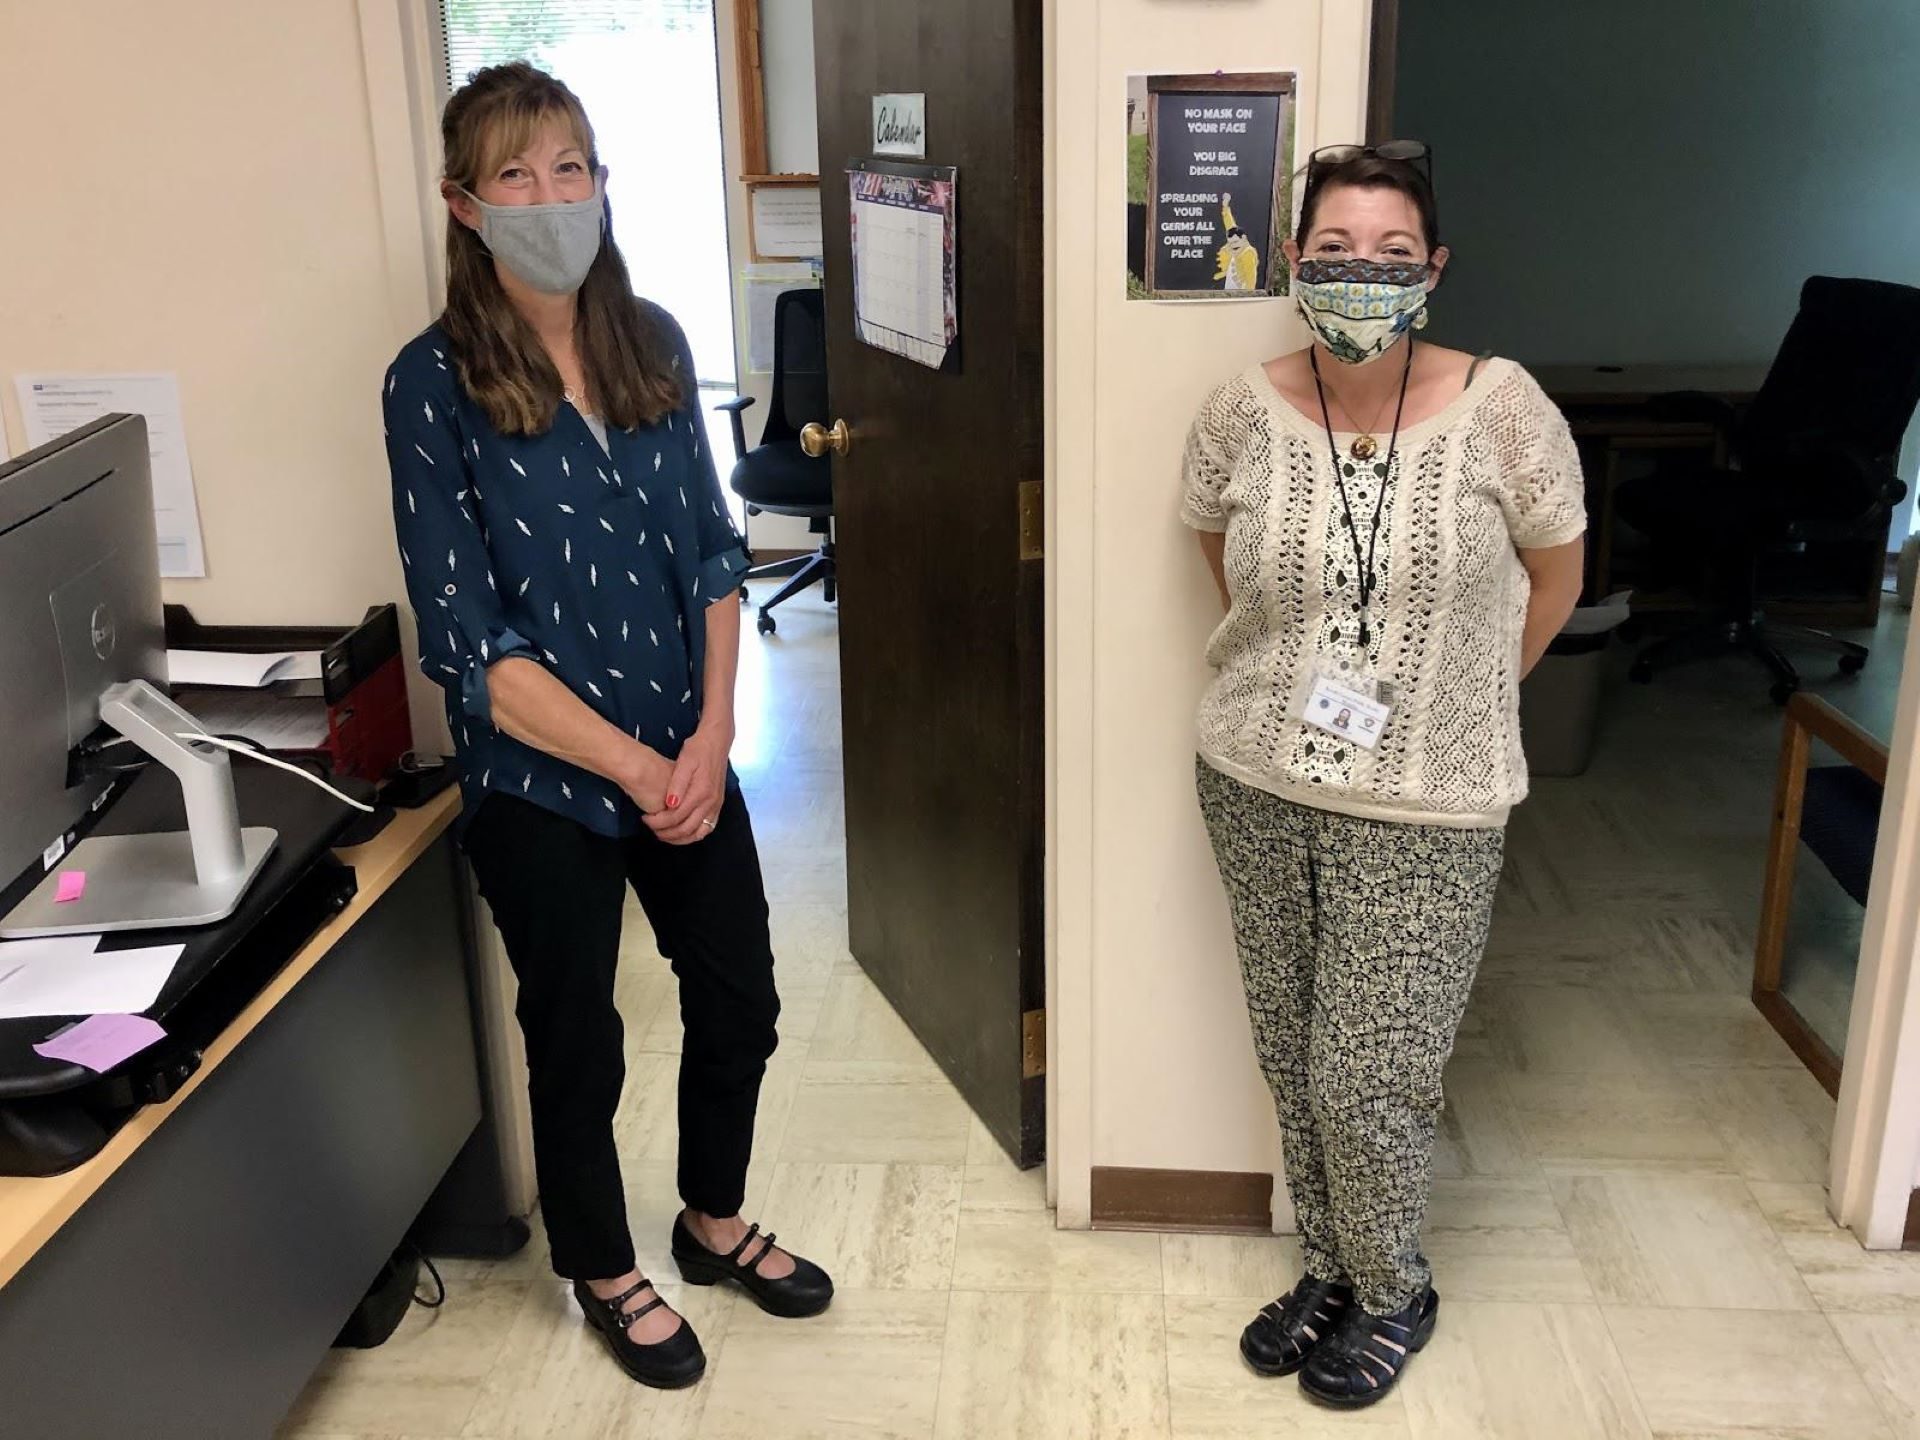 After commissioners in Ravalli County, Mont., said they would not enforce the state's recent mask mandate, public health officer Carole Calderwood (left) submitted her letter of resignation.